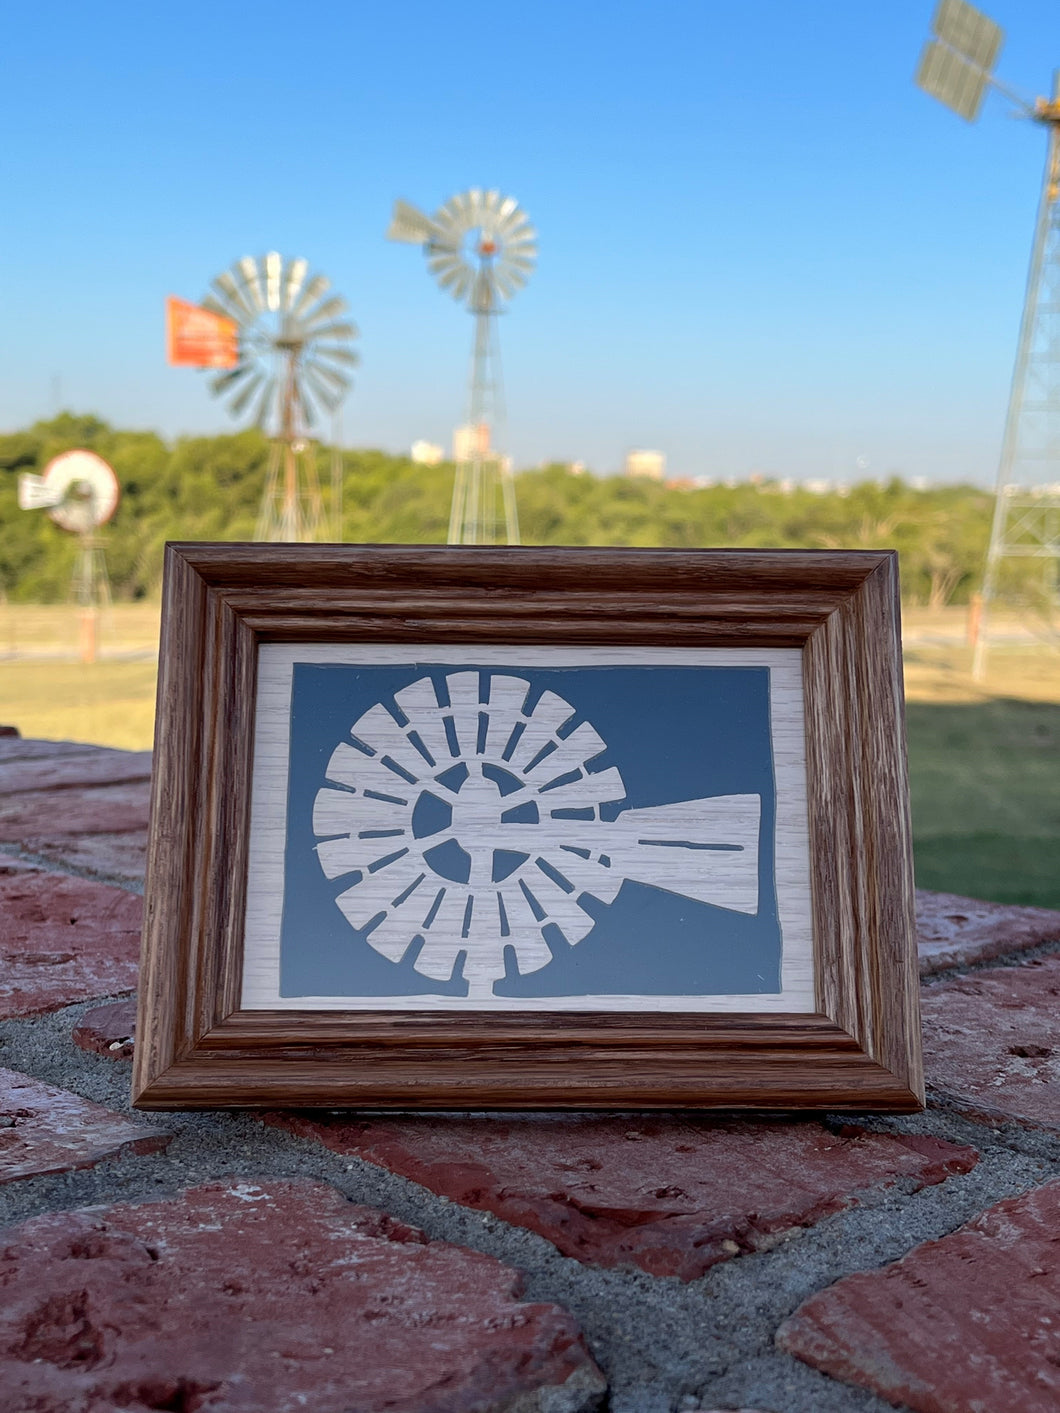 Framed Wooden Windmill Fan with Tail